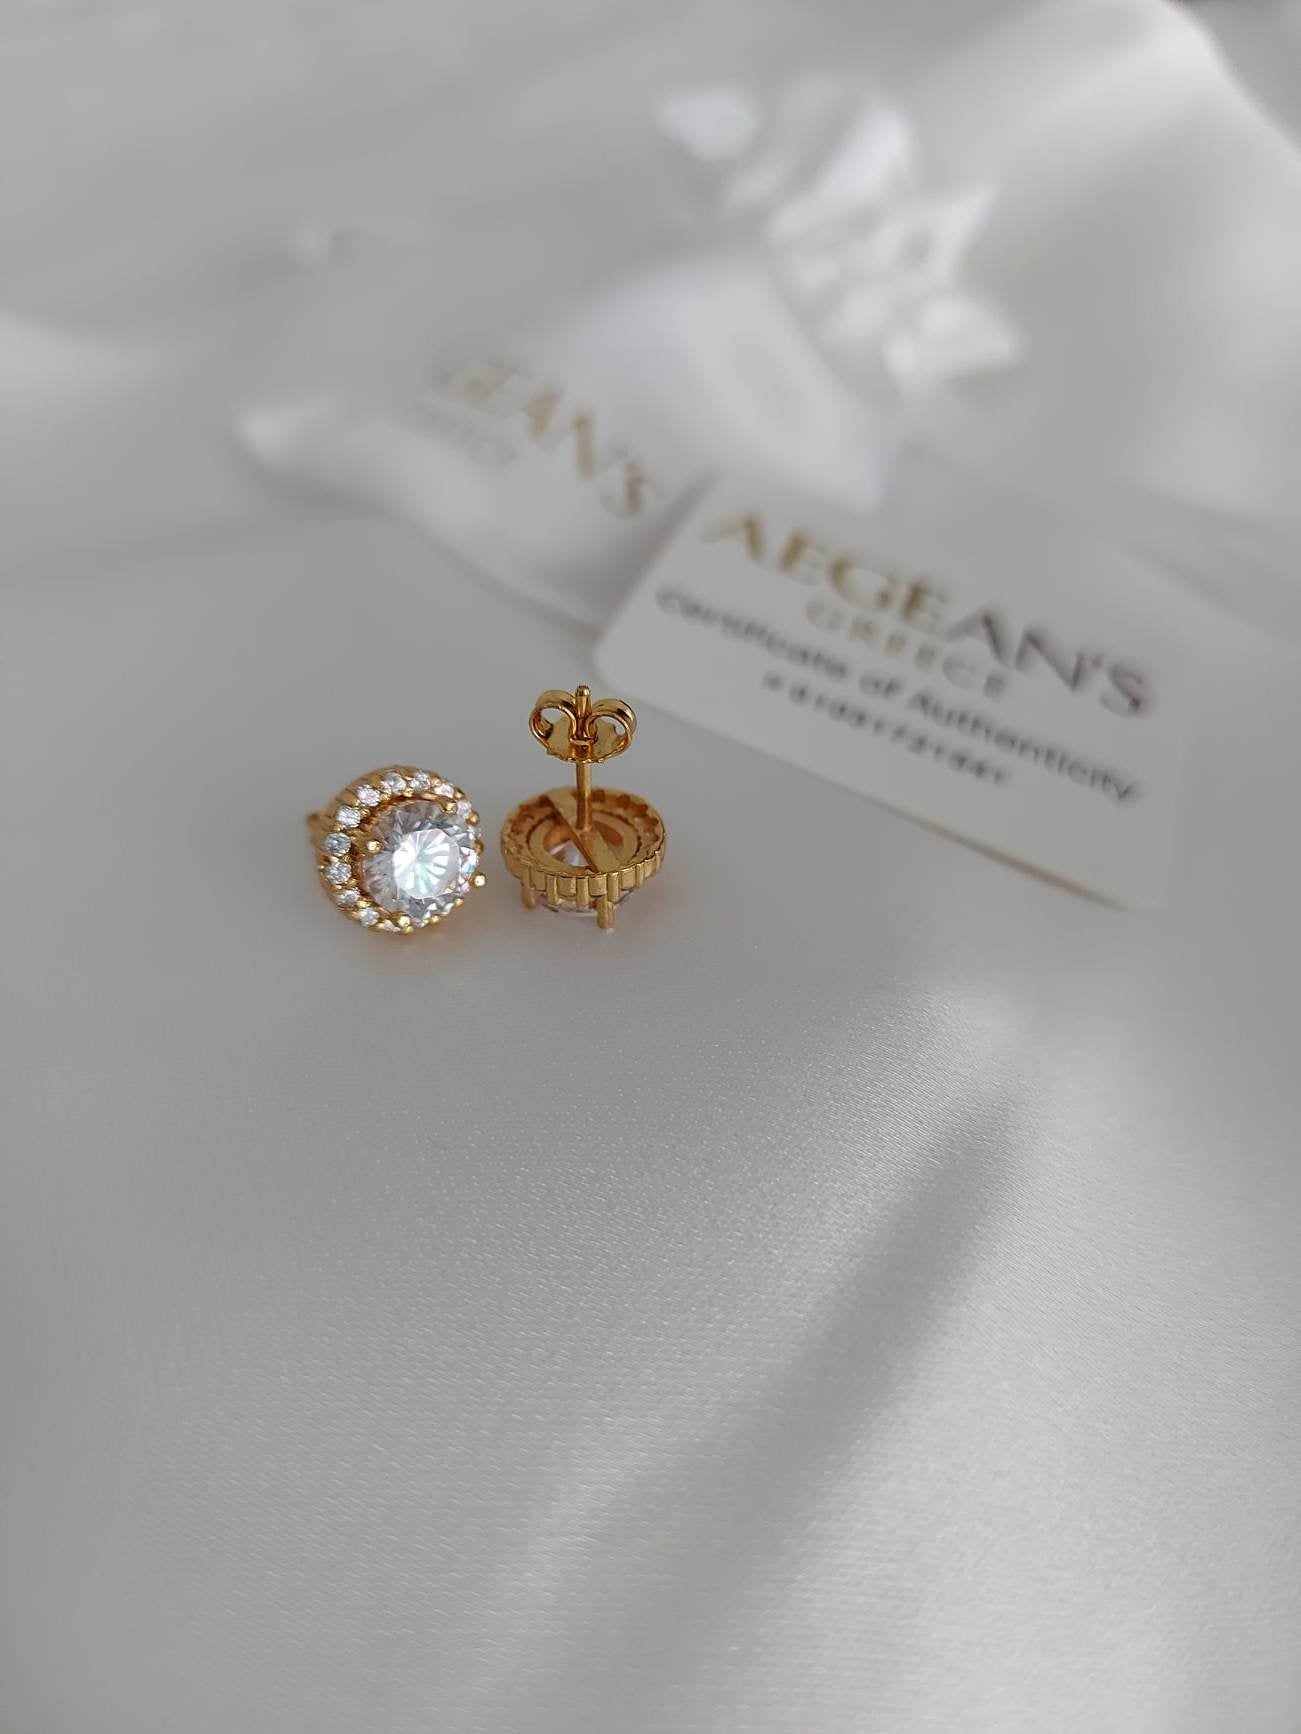 ELENA - Luxurious Gold-Plated Round Stud Earrings with French Cubic Zirconia Stones